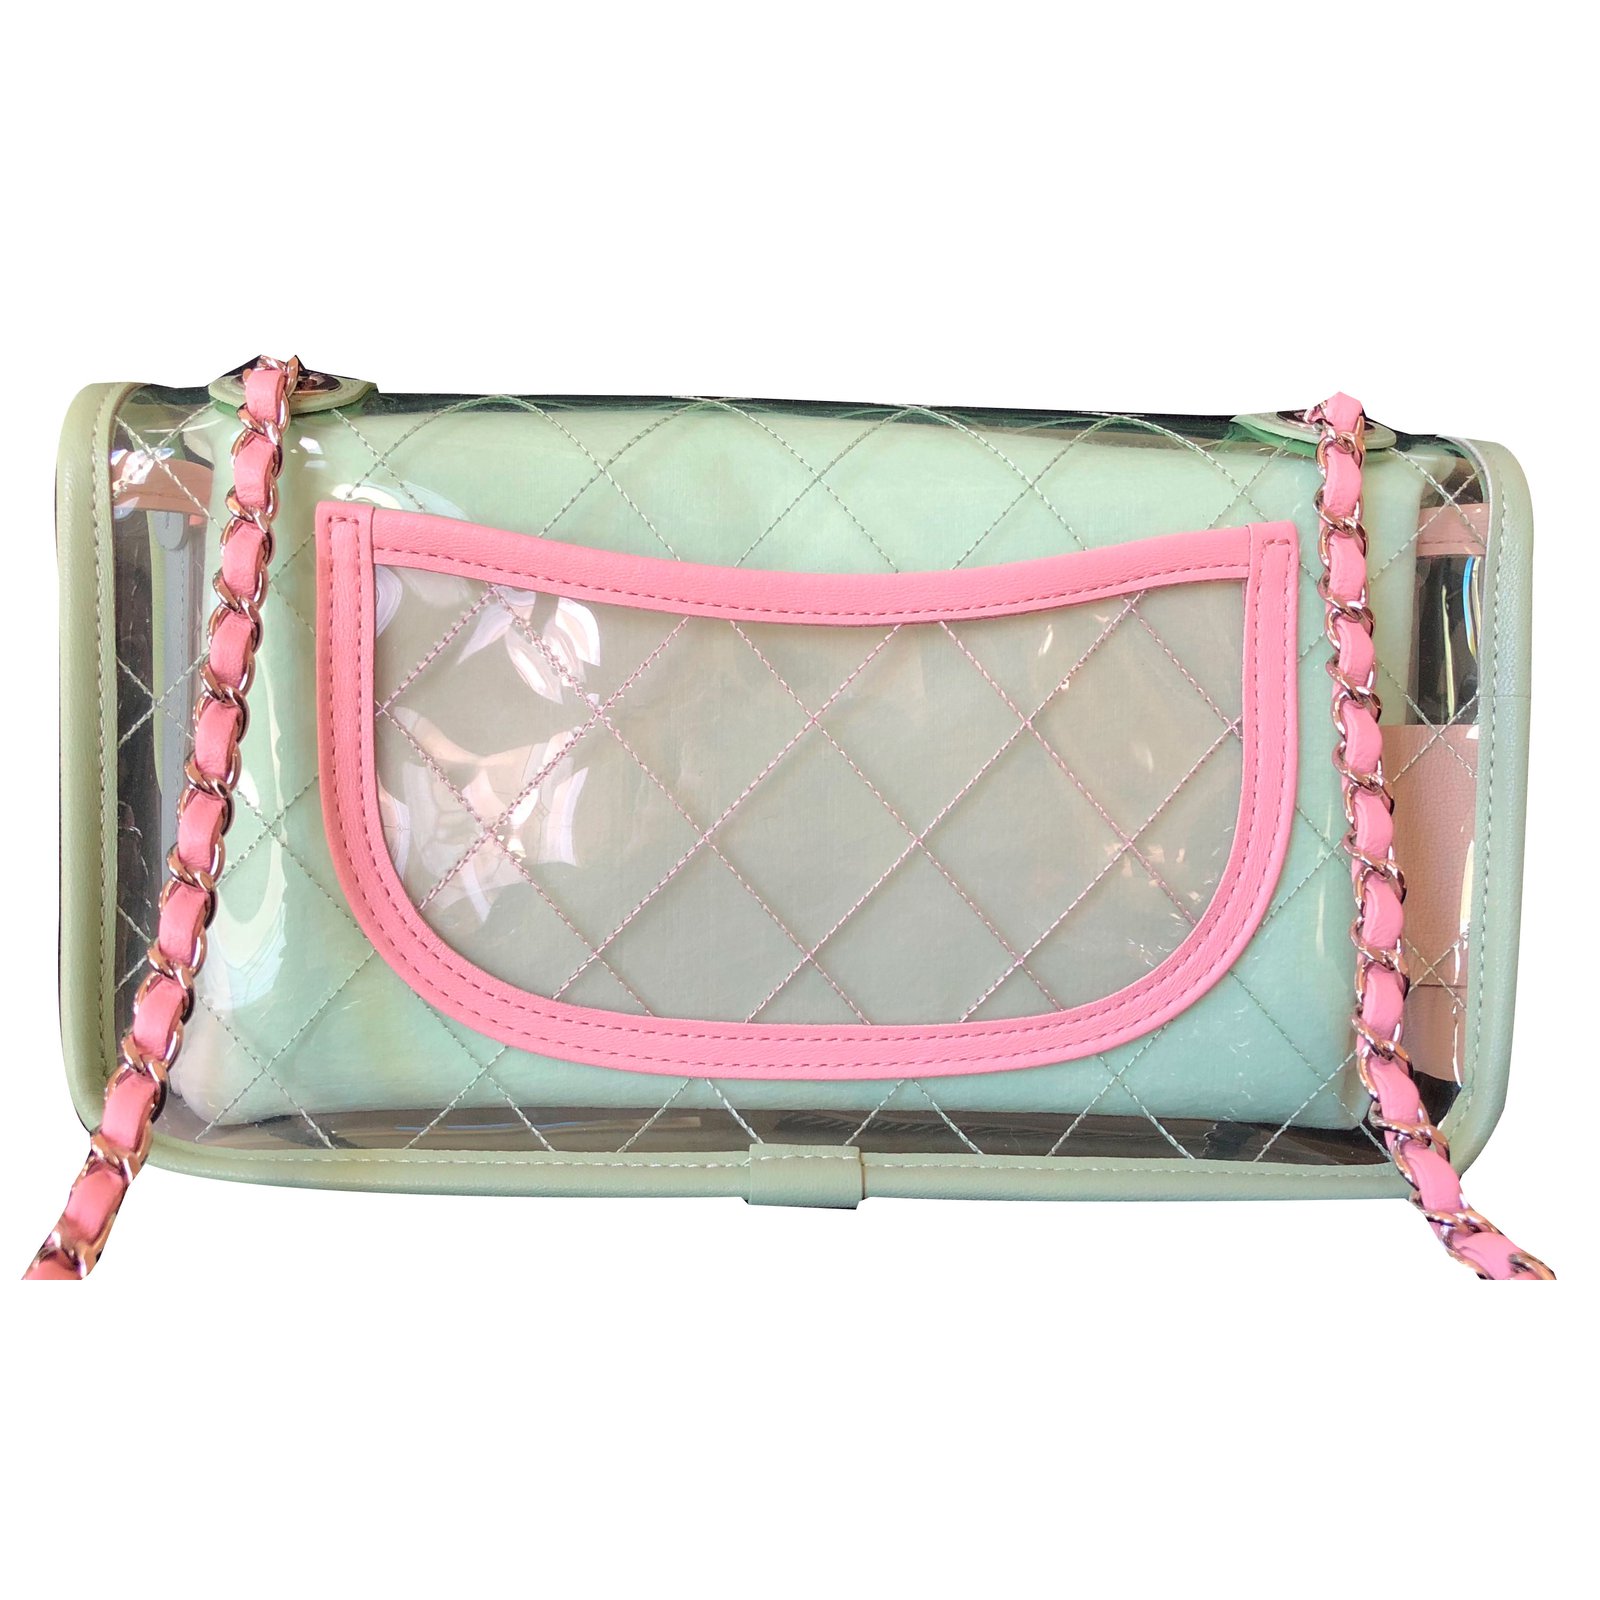 Runway Quilted Single Flap with Silver Chain Green/Blue/Pink PVC/Lambskin  Bag